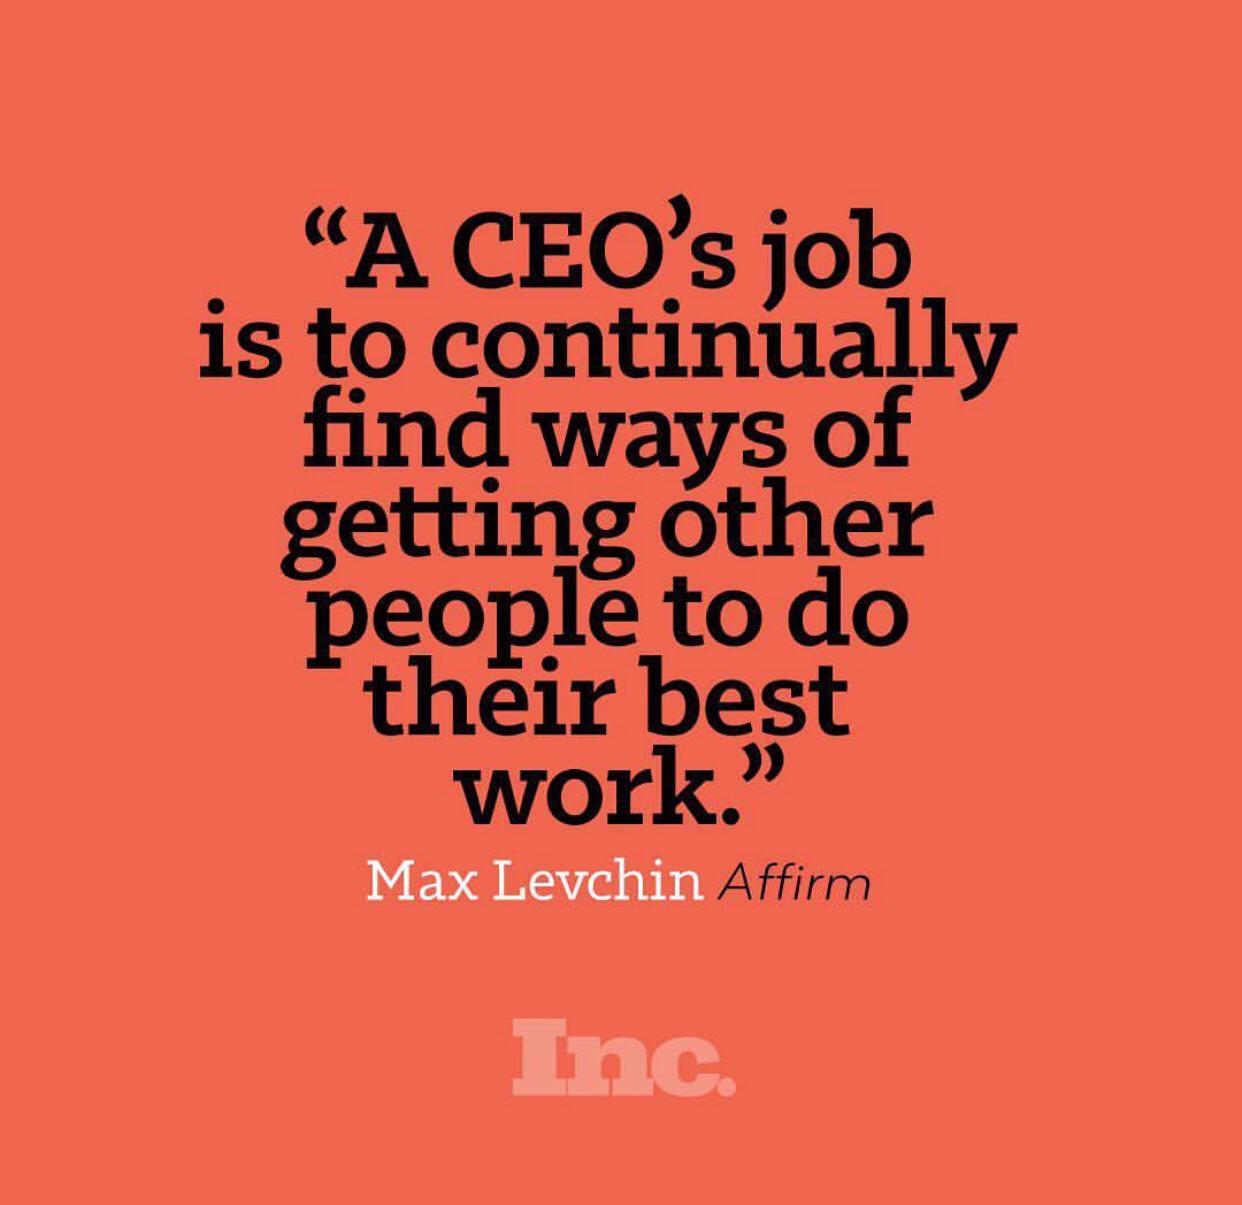 5 Main Responsibilities of a CEO